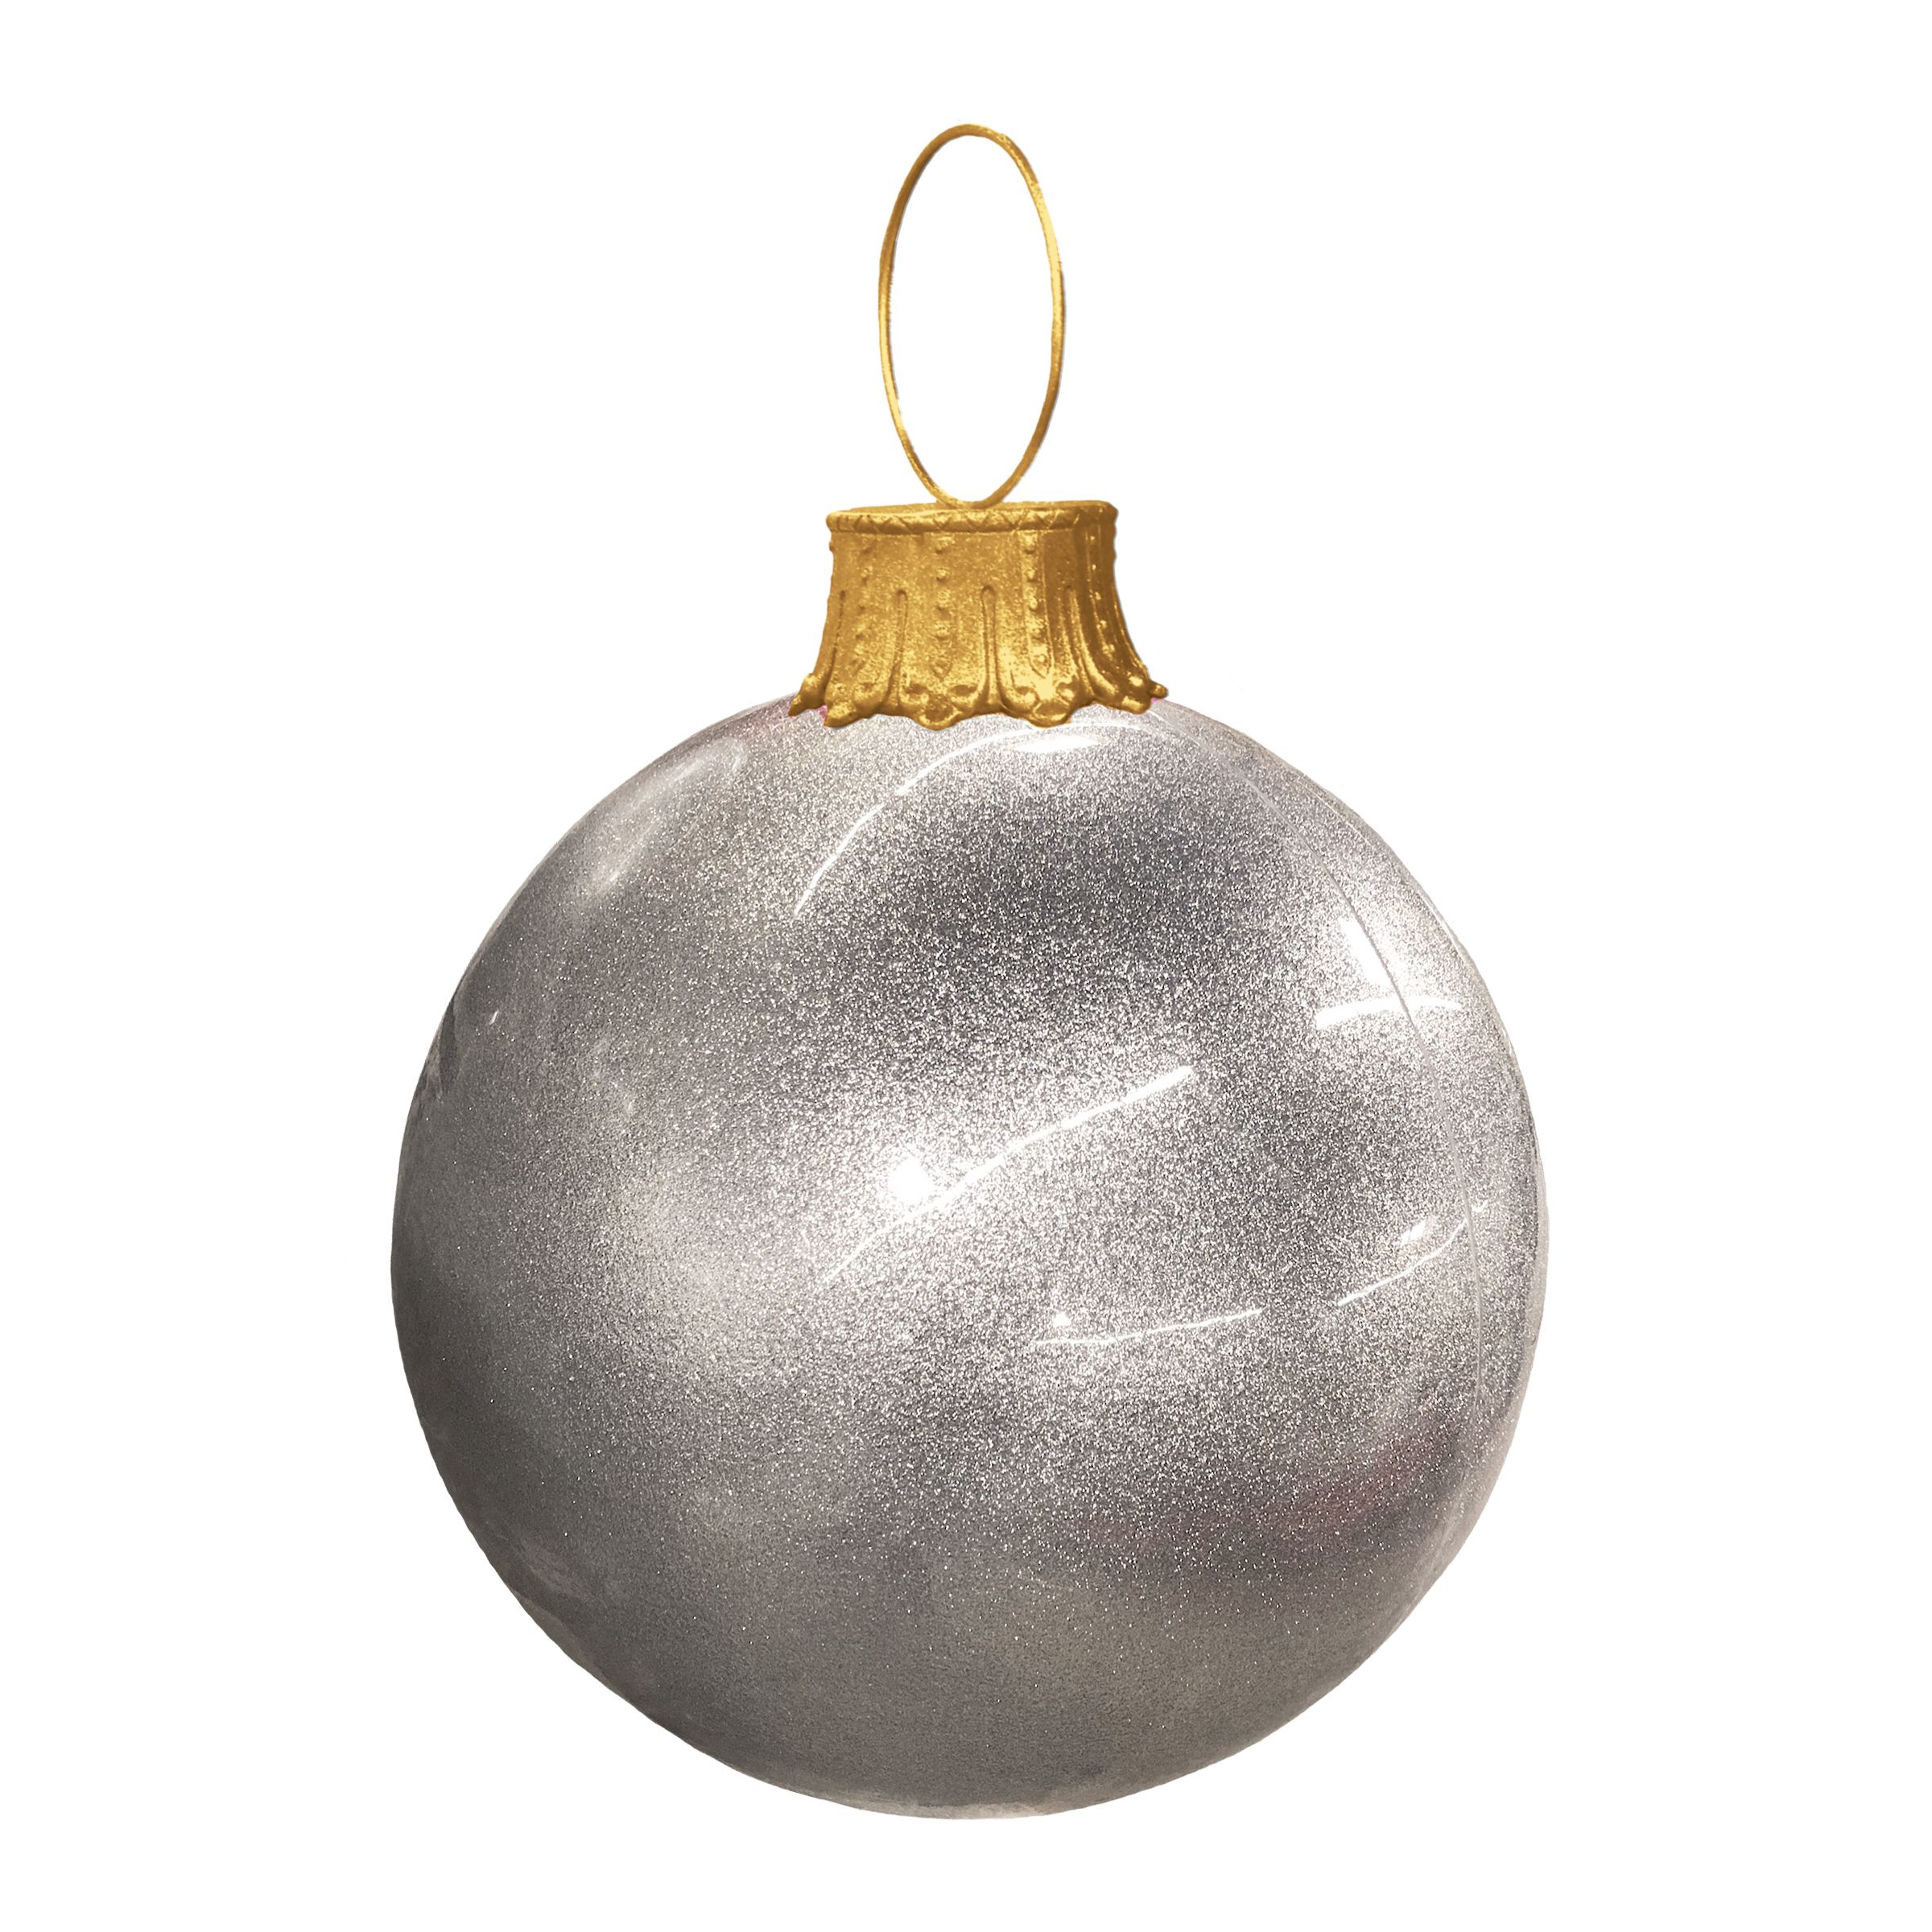 Oversized fiberglass ball ornament in silver paint with glitter finish and gold cap